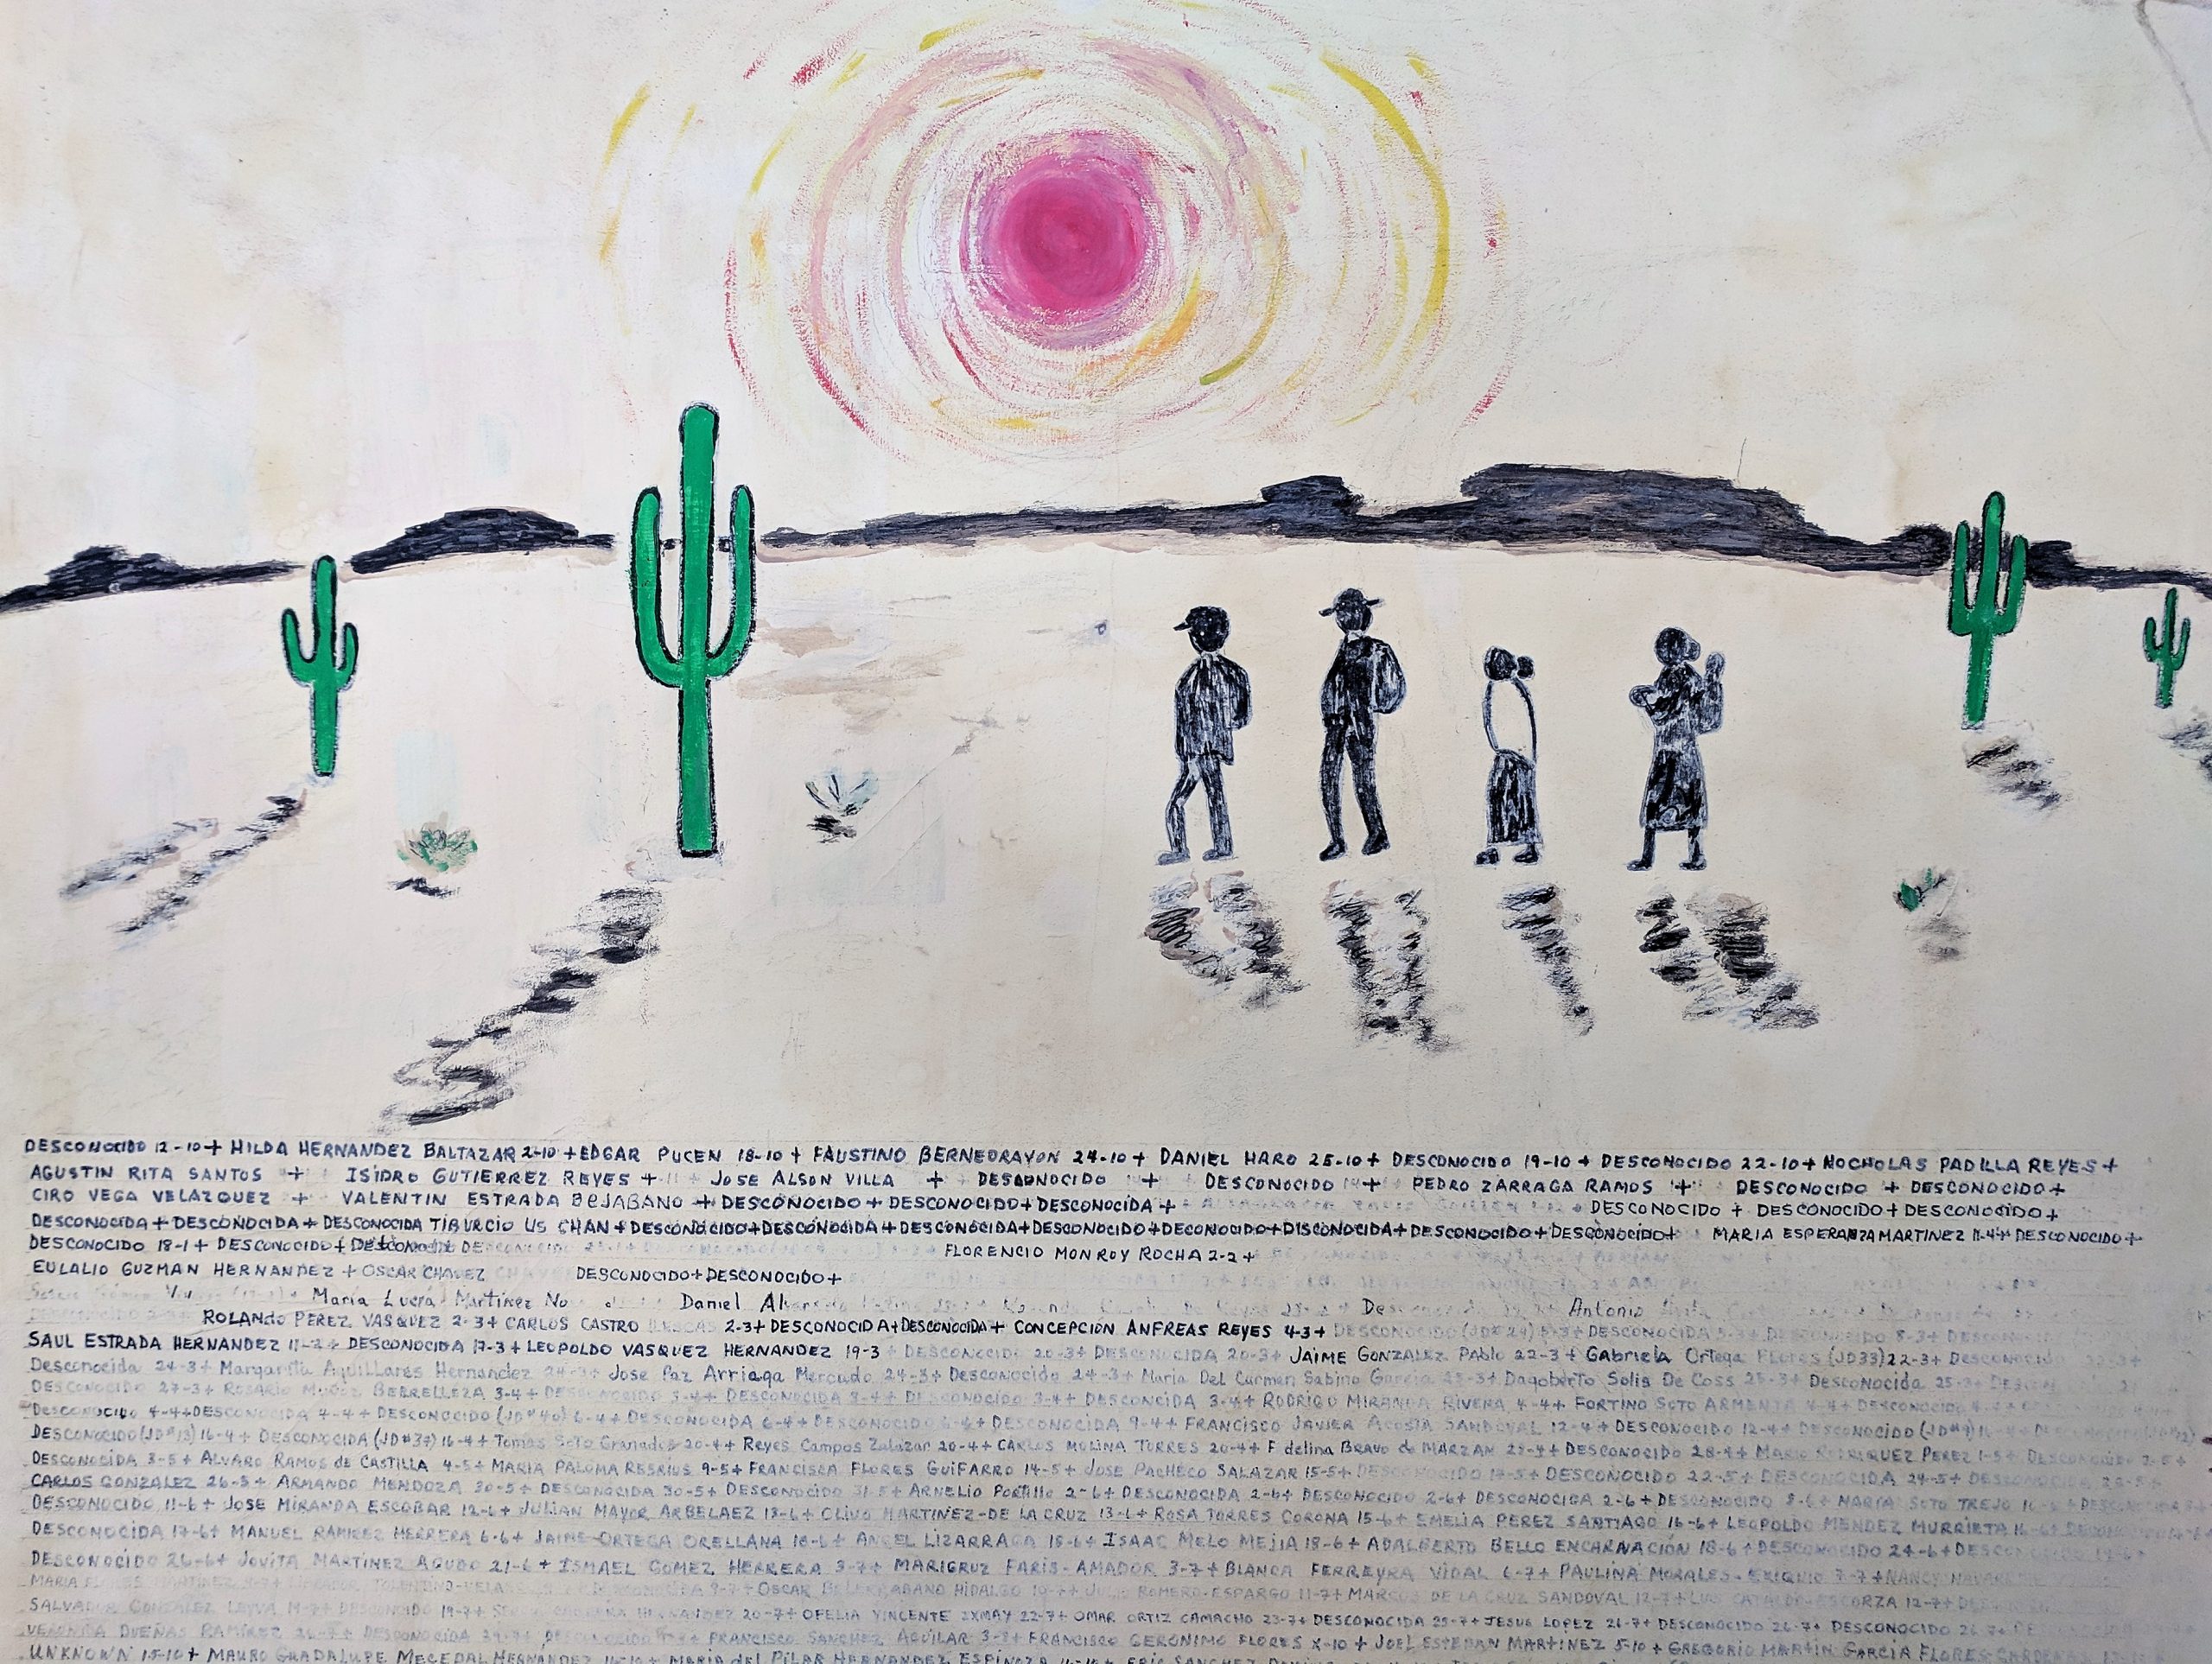 One of the murals on the wall of the home of Sister Betty Campbell and Father Peter Hinde in Ciudad Juárez.